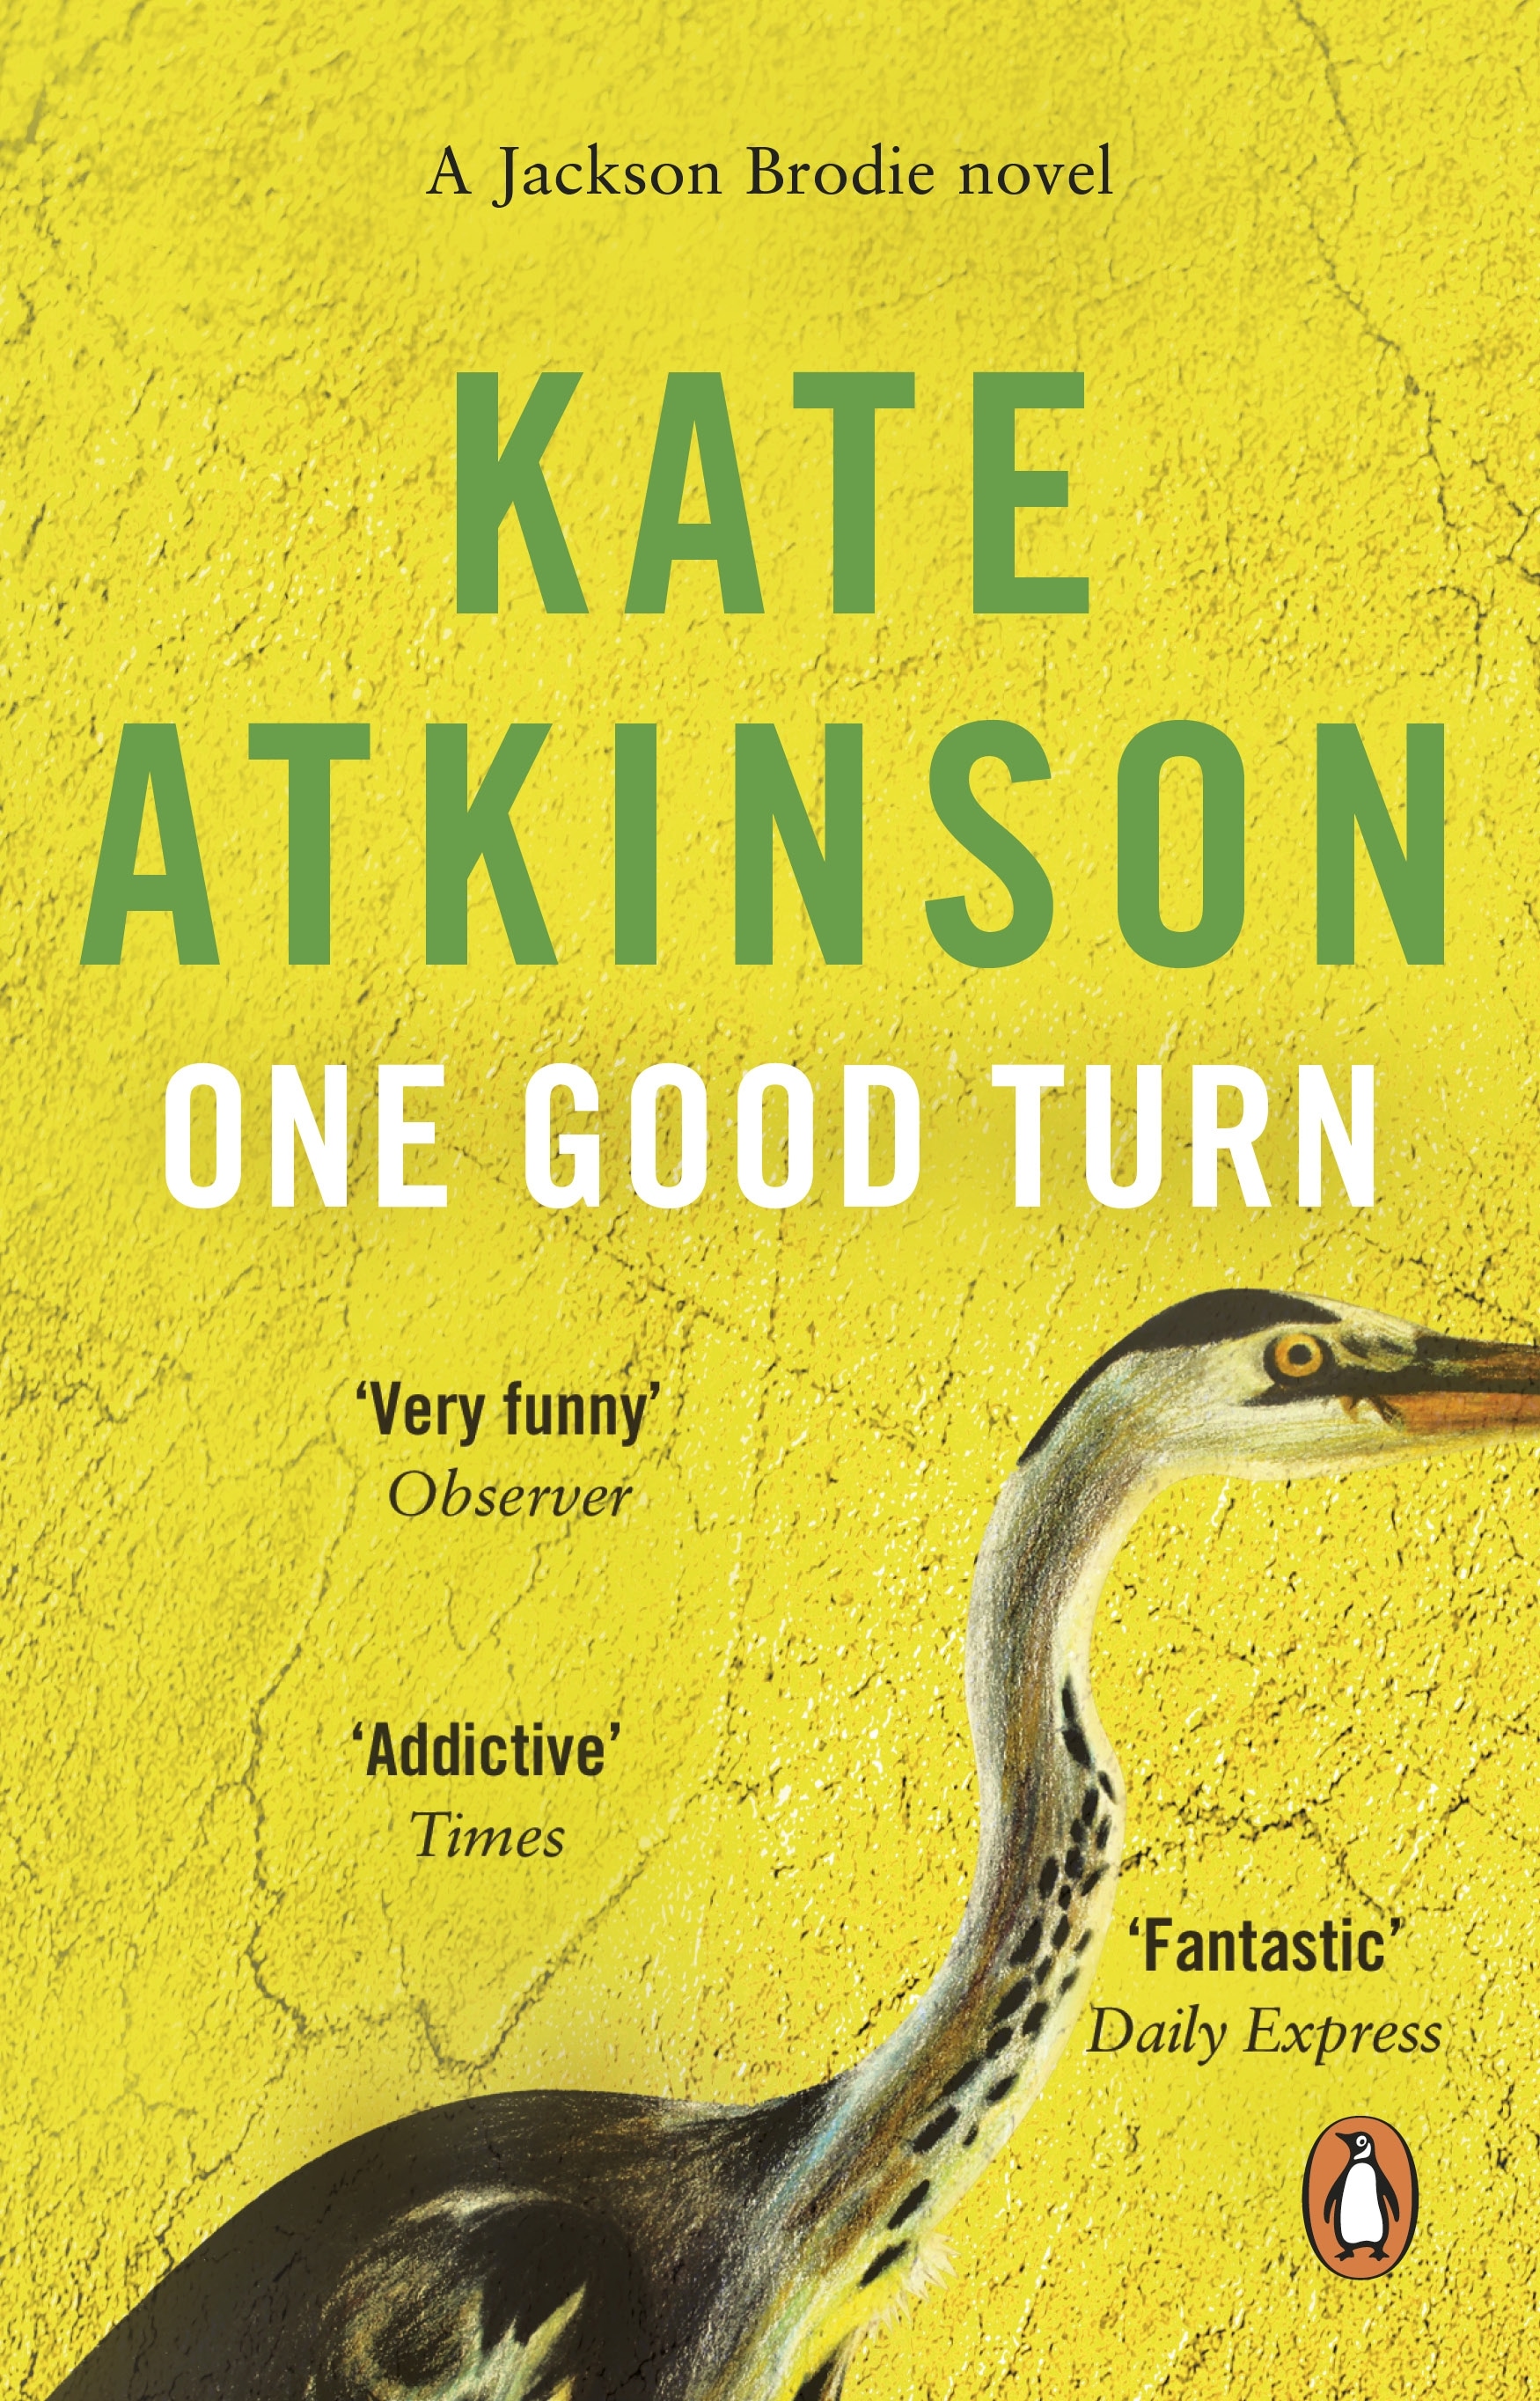 Book “One Good Turn” by Kate Atkinson